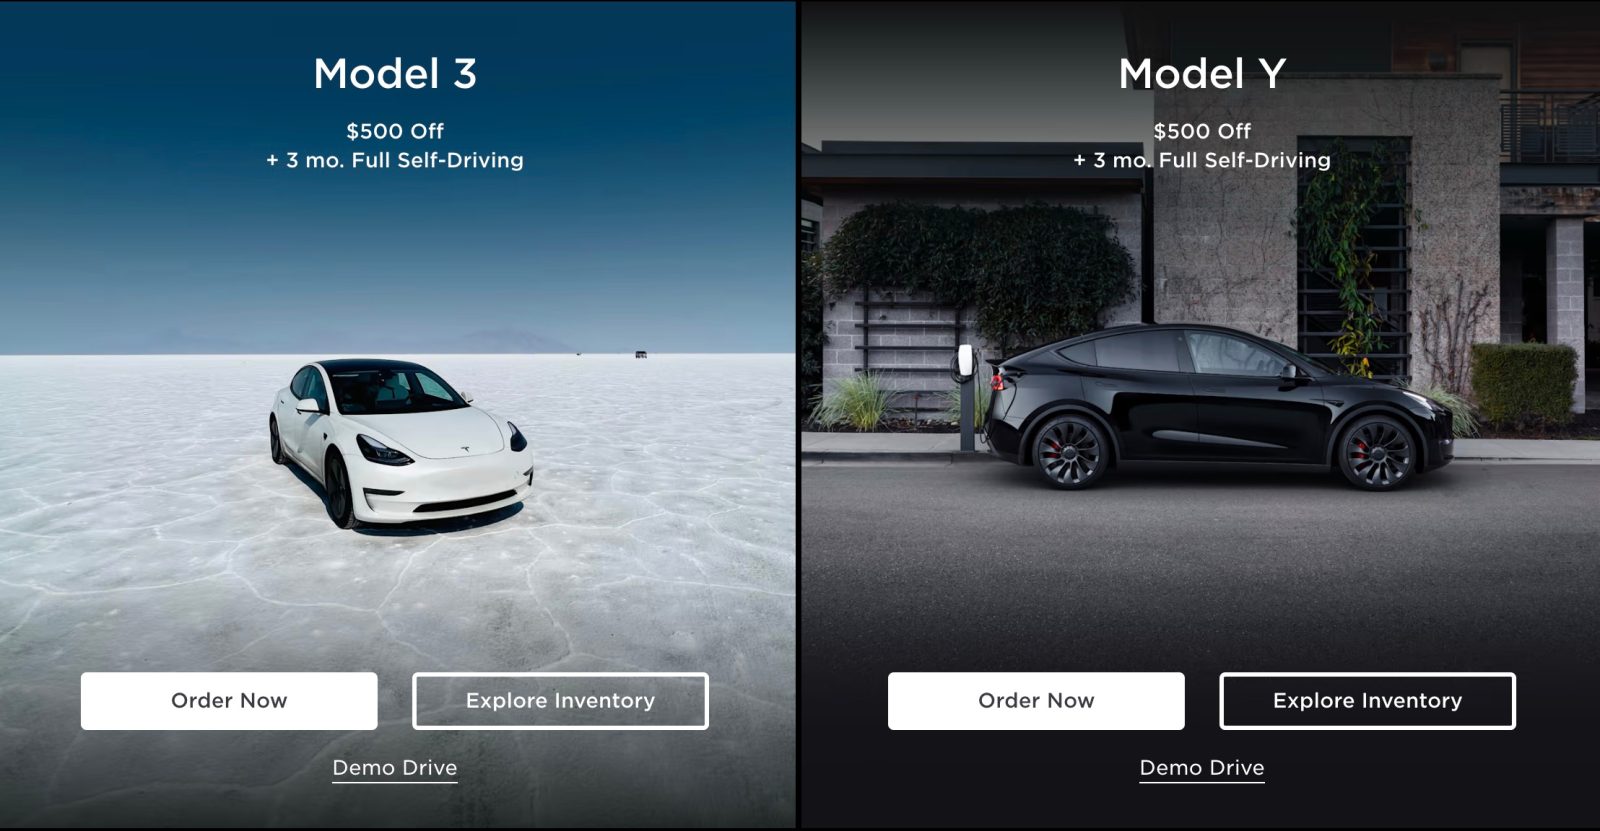 Tesla adds cash discount on Model 3/Y through referral program to boost